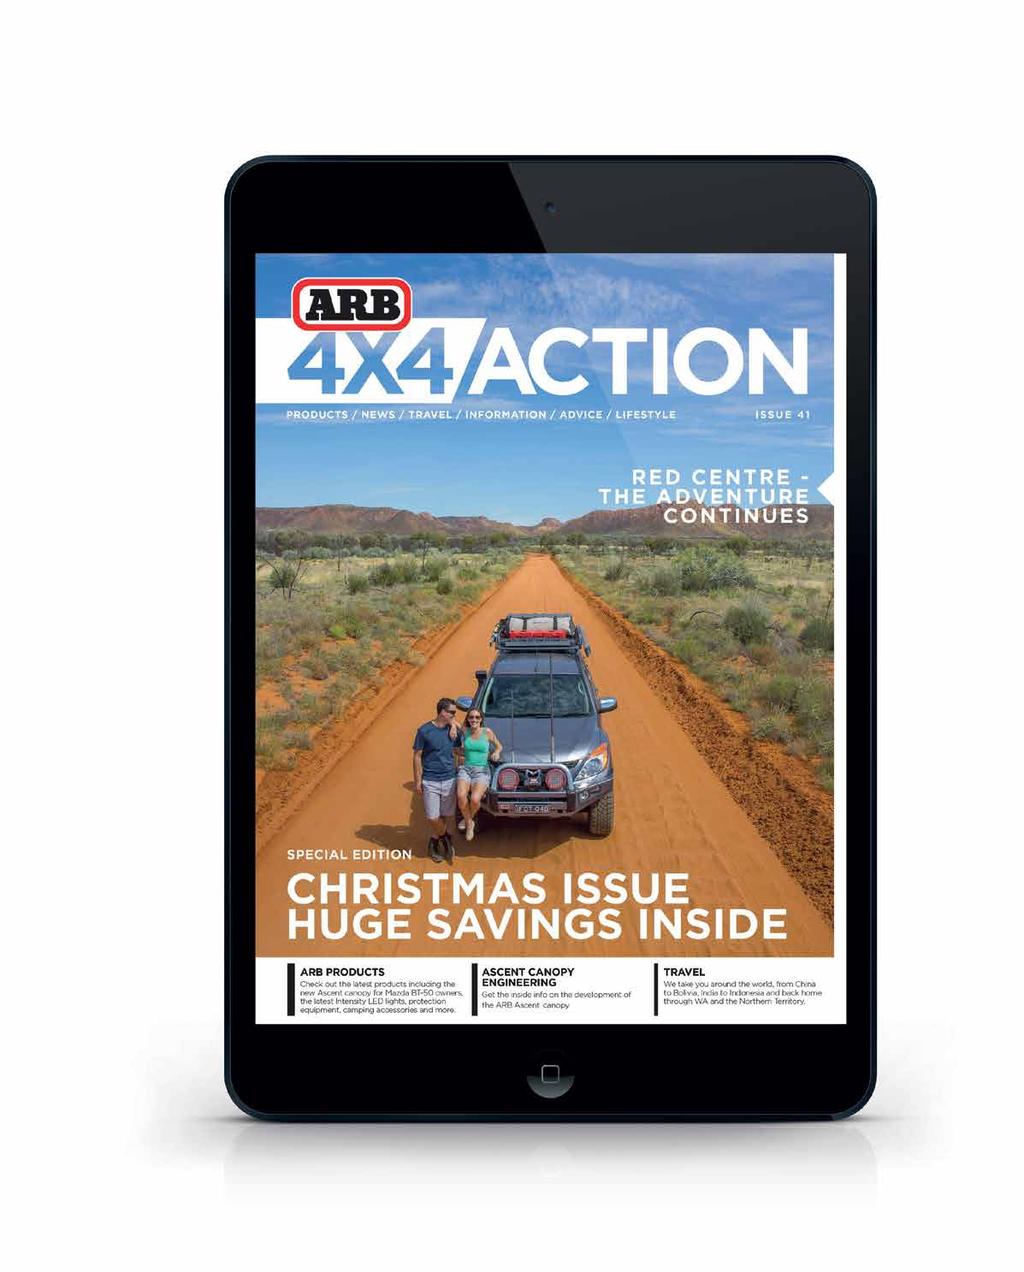 Subscribe to ARB Want more ARB news and 4x4 stories? Then you need to get your hands on ARB s magazine, ARB 4X4 Action.